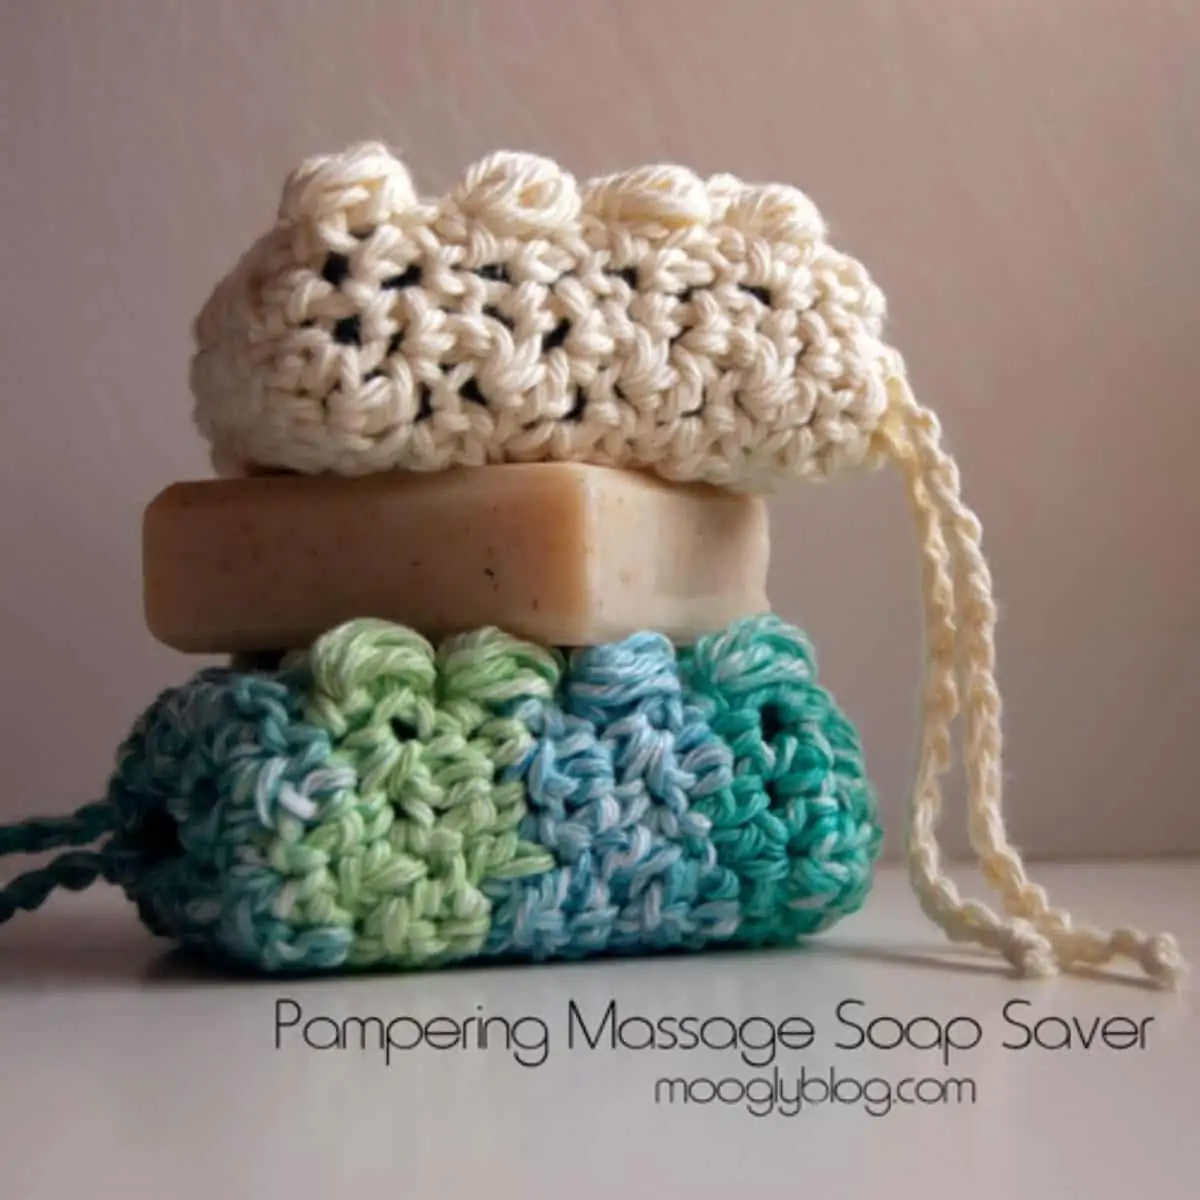 What to Crochet with Cotton Yarn